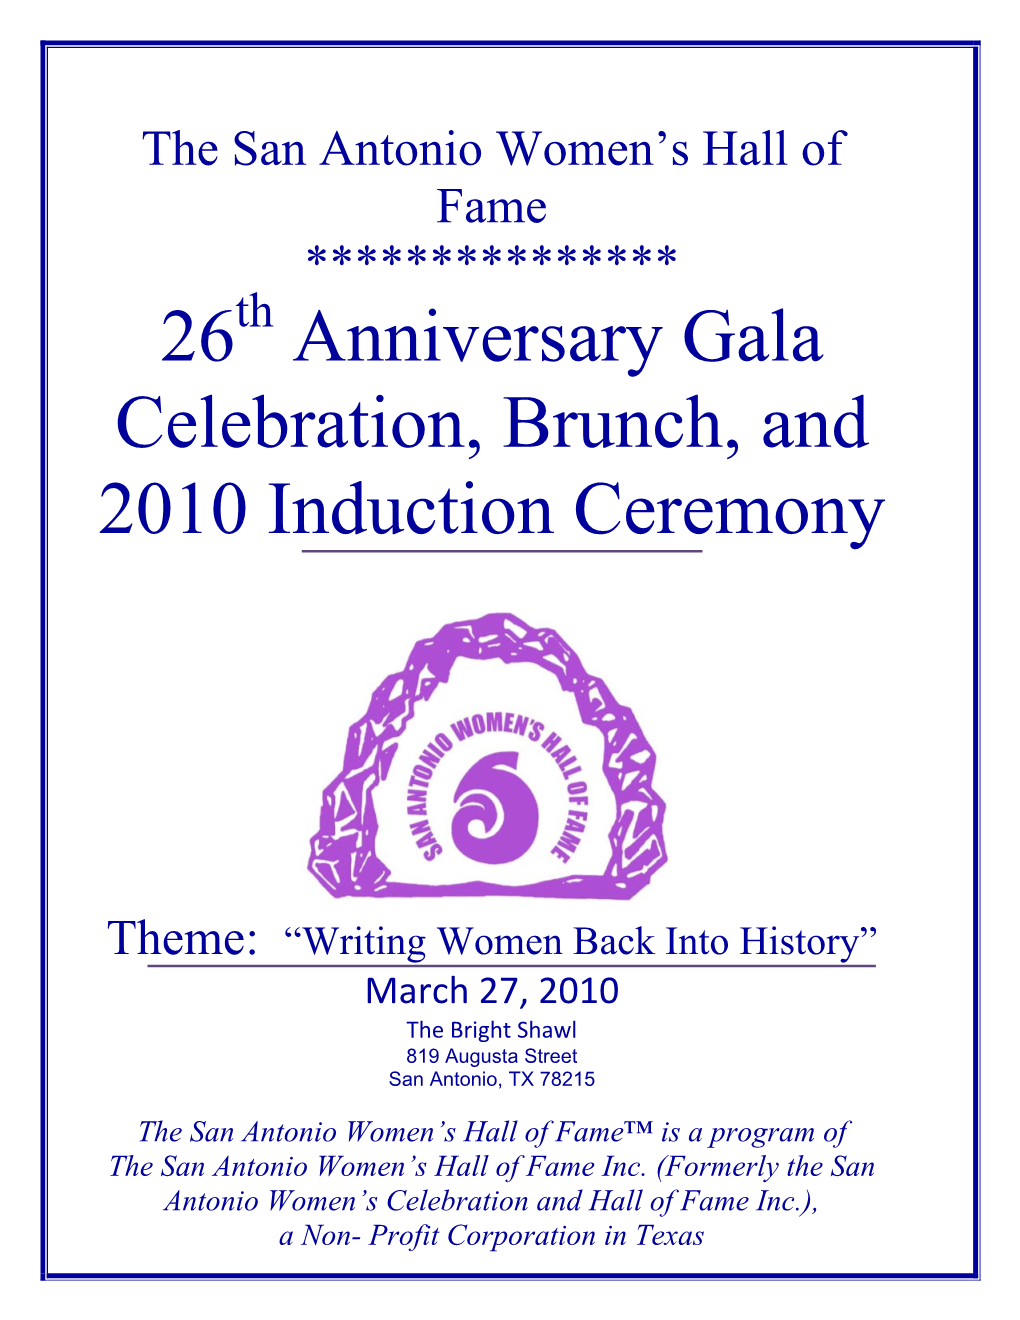 26 Anniversary Gala Celebration, Brunch, and 2010 Induction